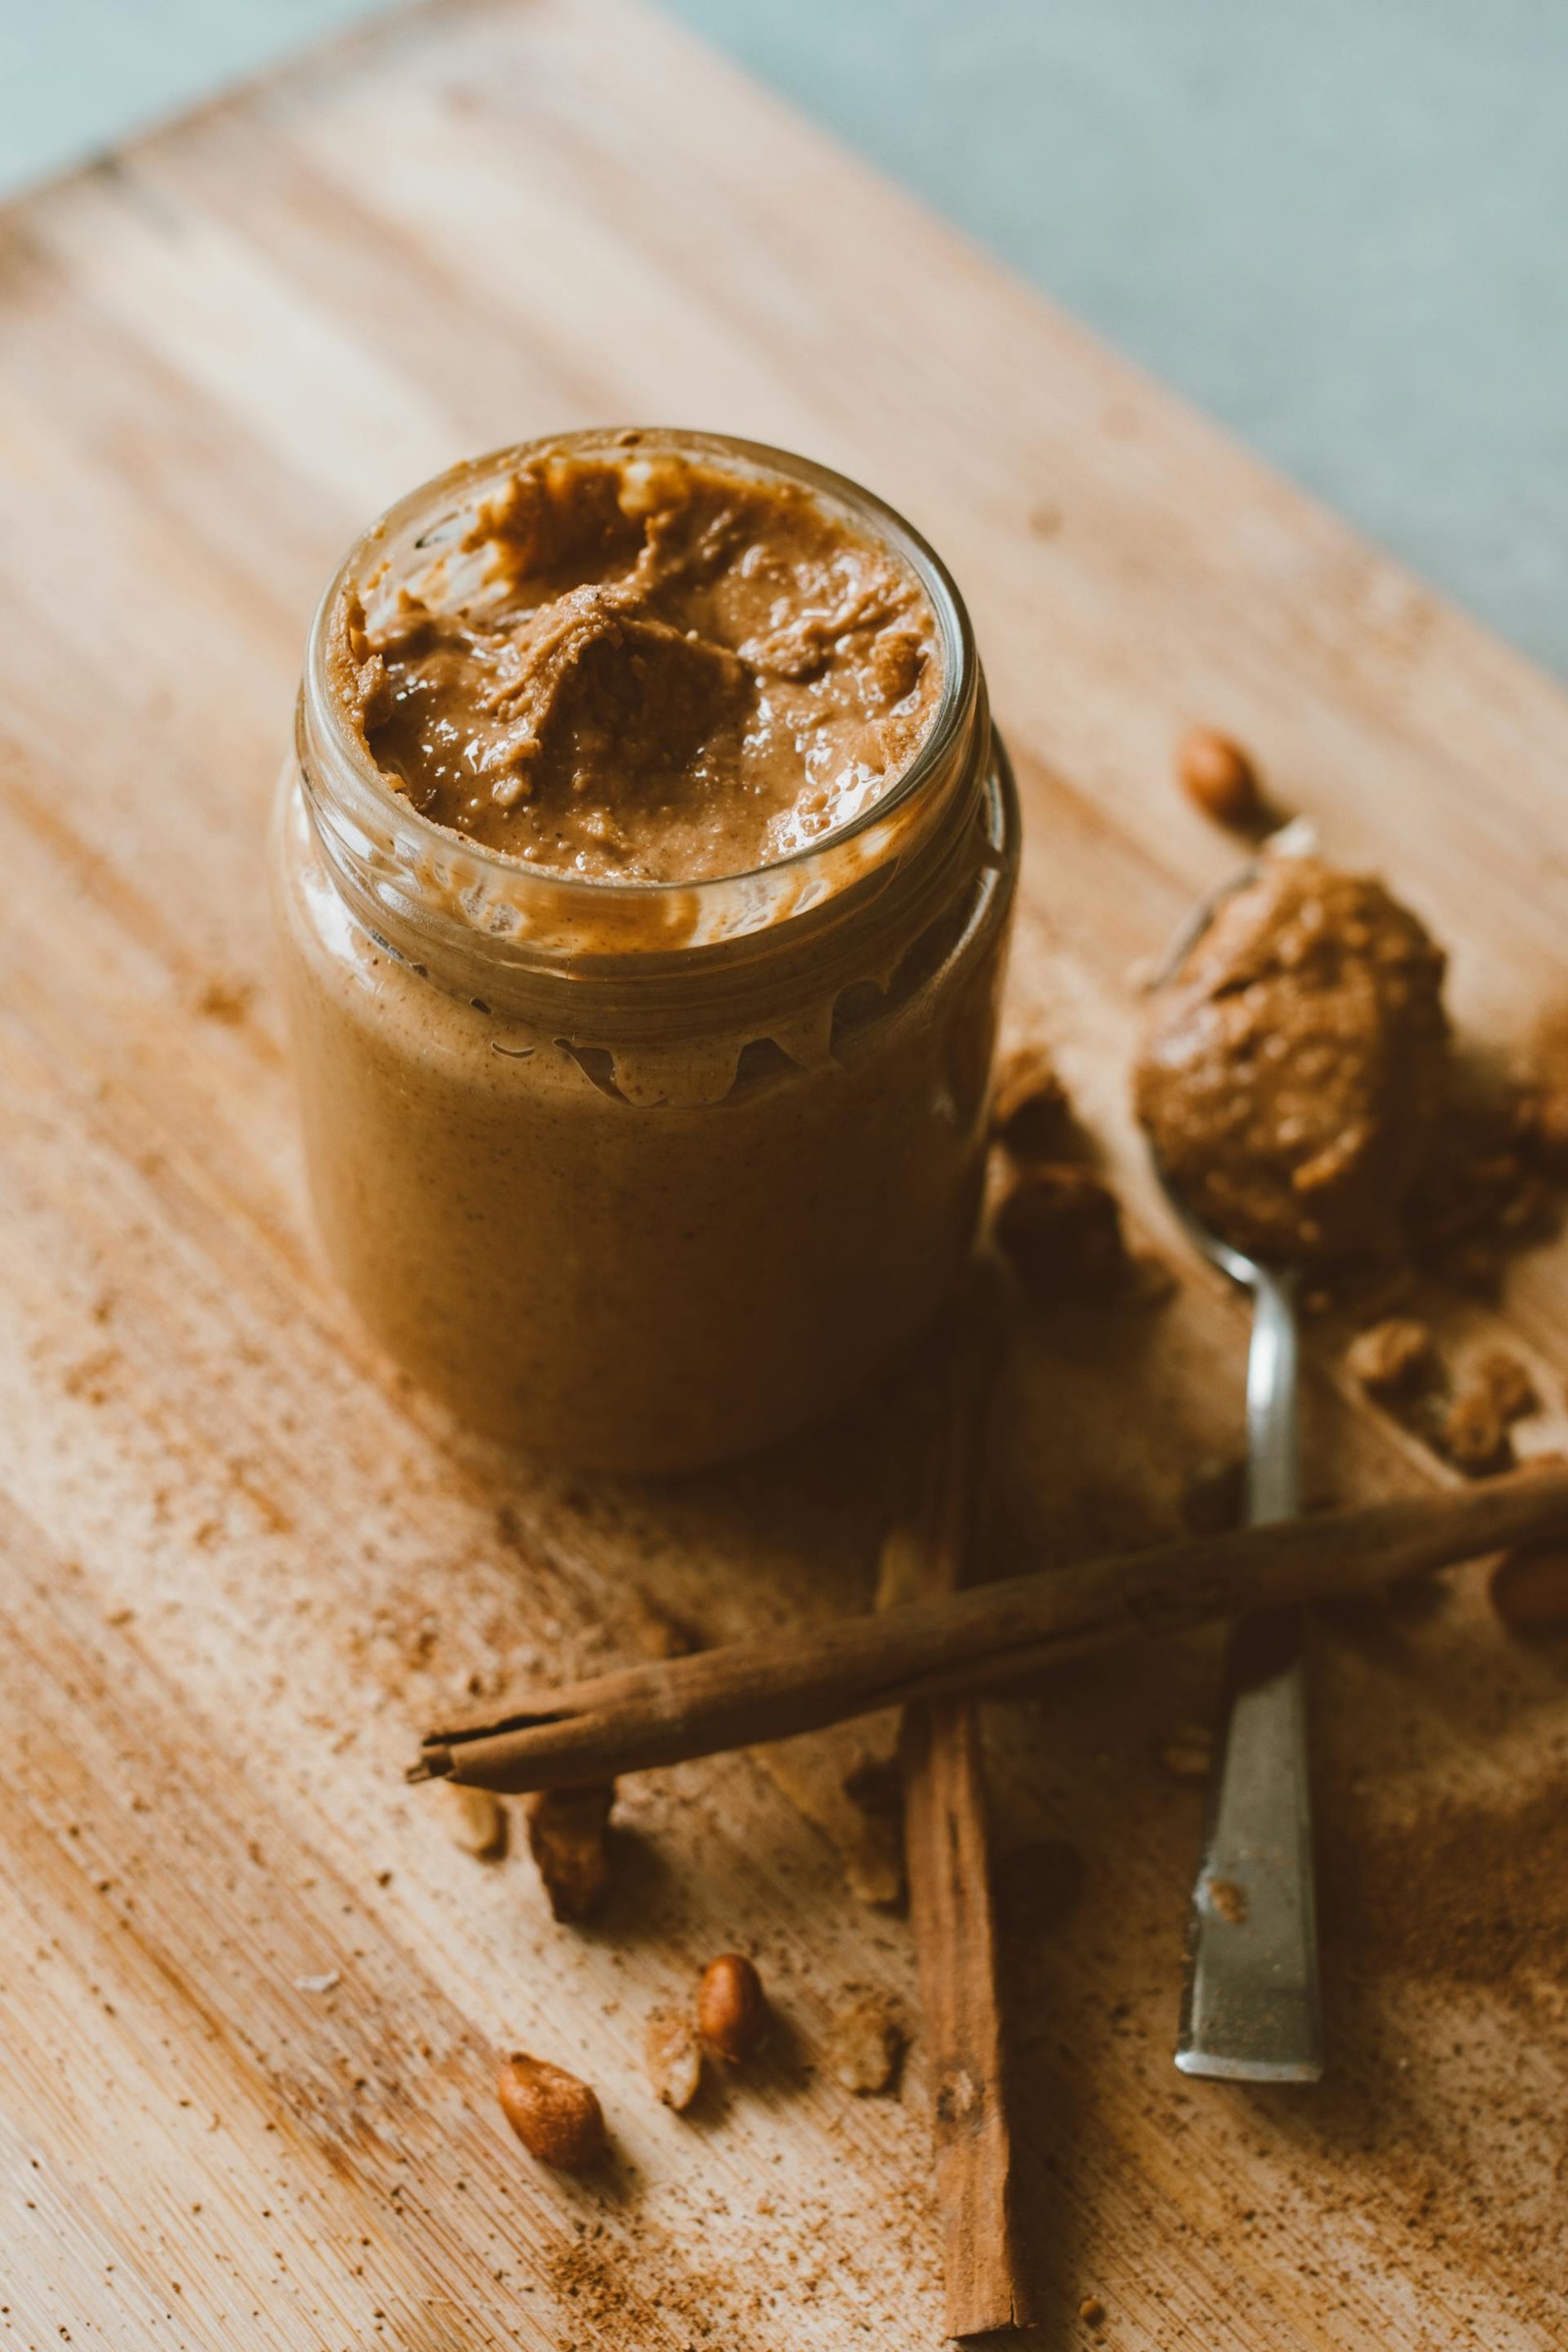 A glass jar of peanut butter with a spoon with peanut butter.